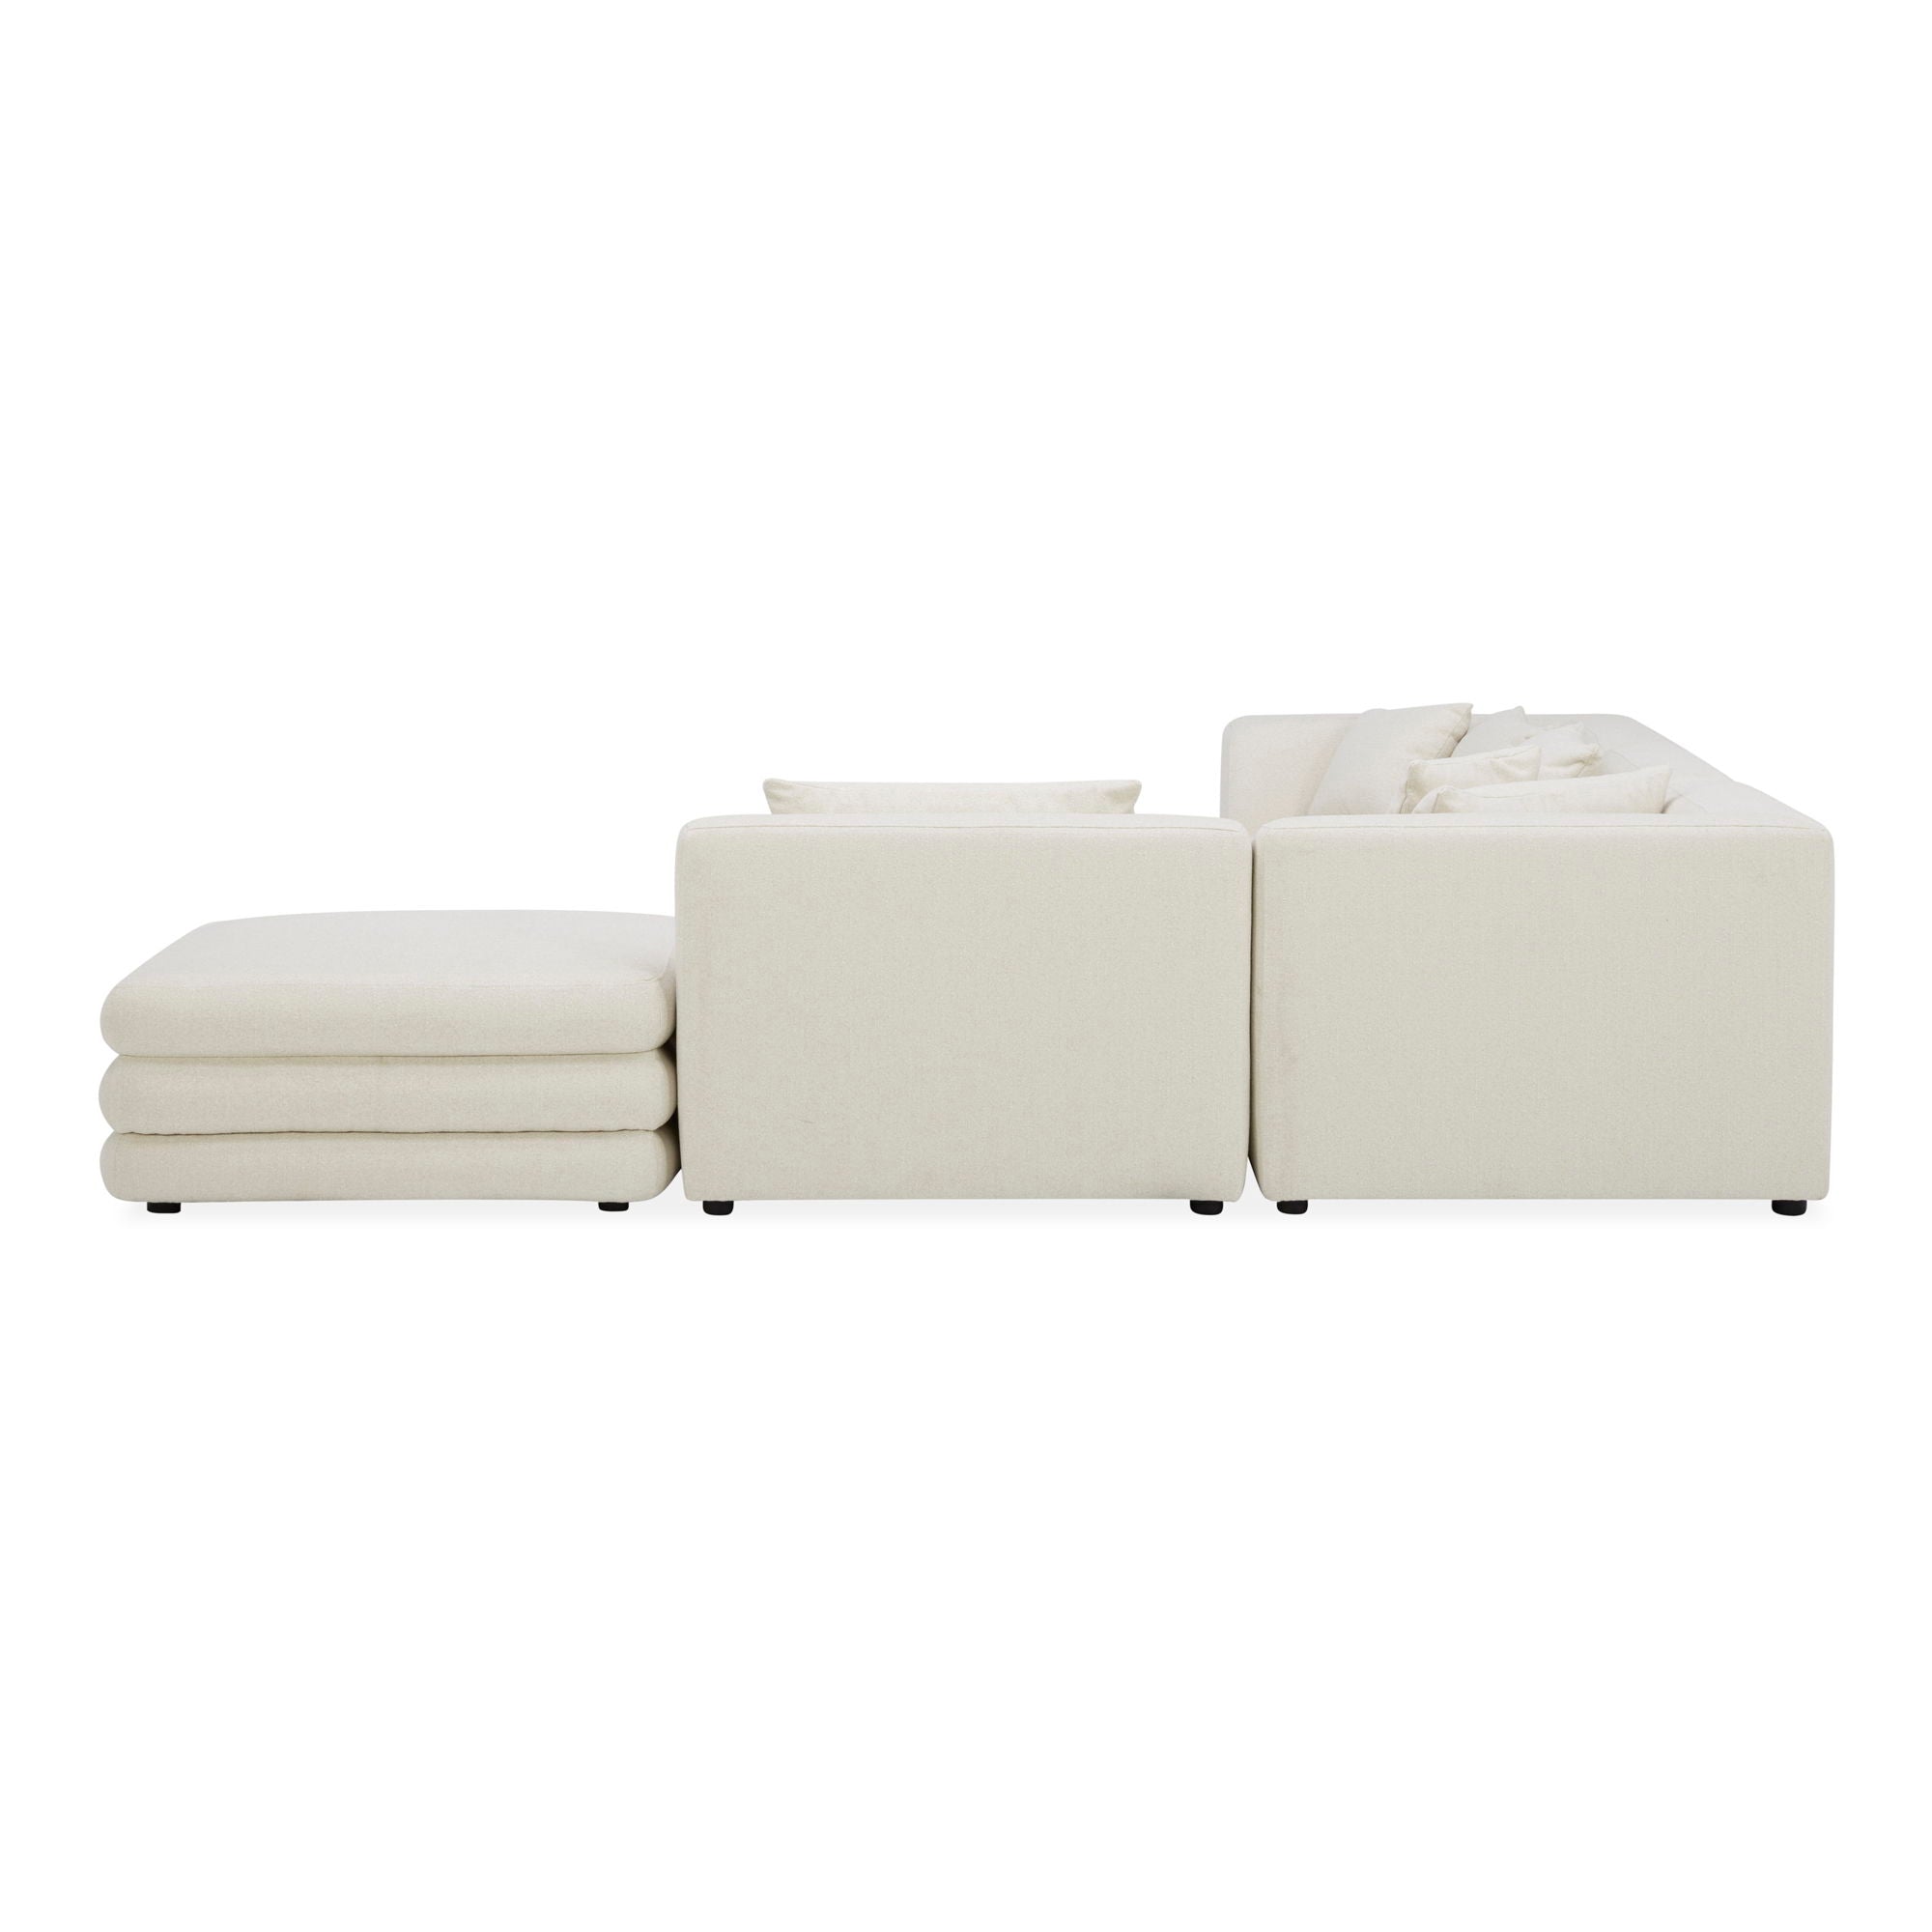 Lowtide - Dream Modular Configuration - Warm White-Stationary Sectionals-American Furniture Outlet